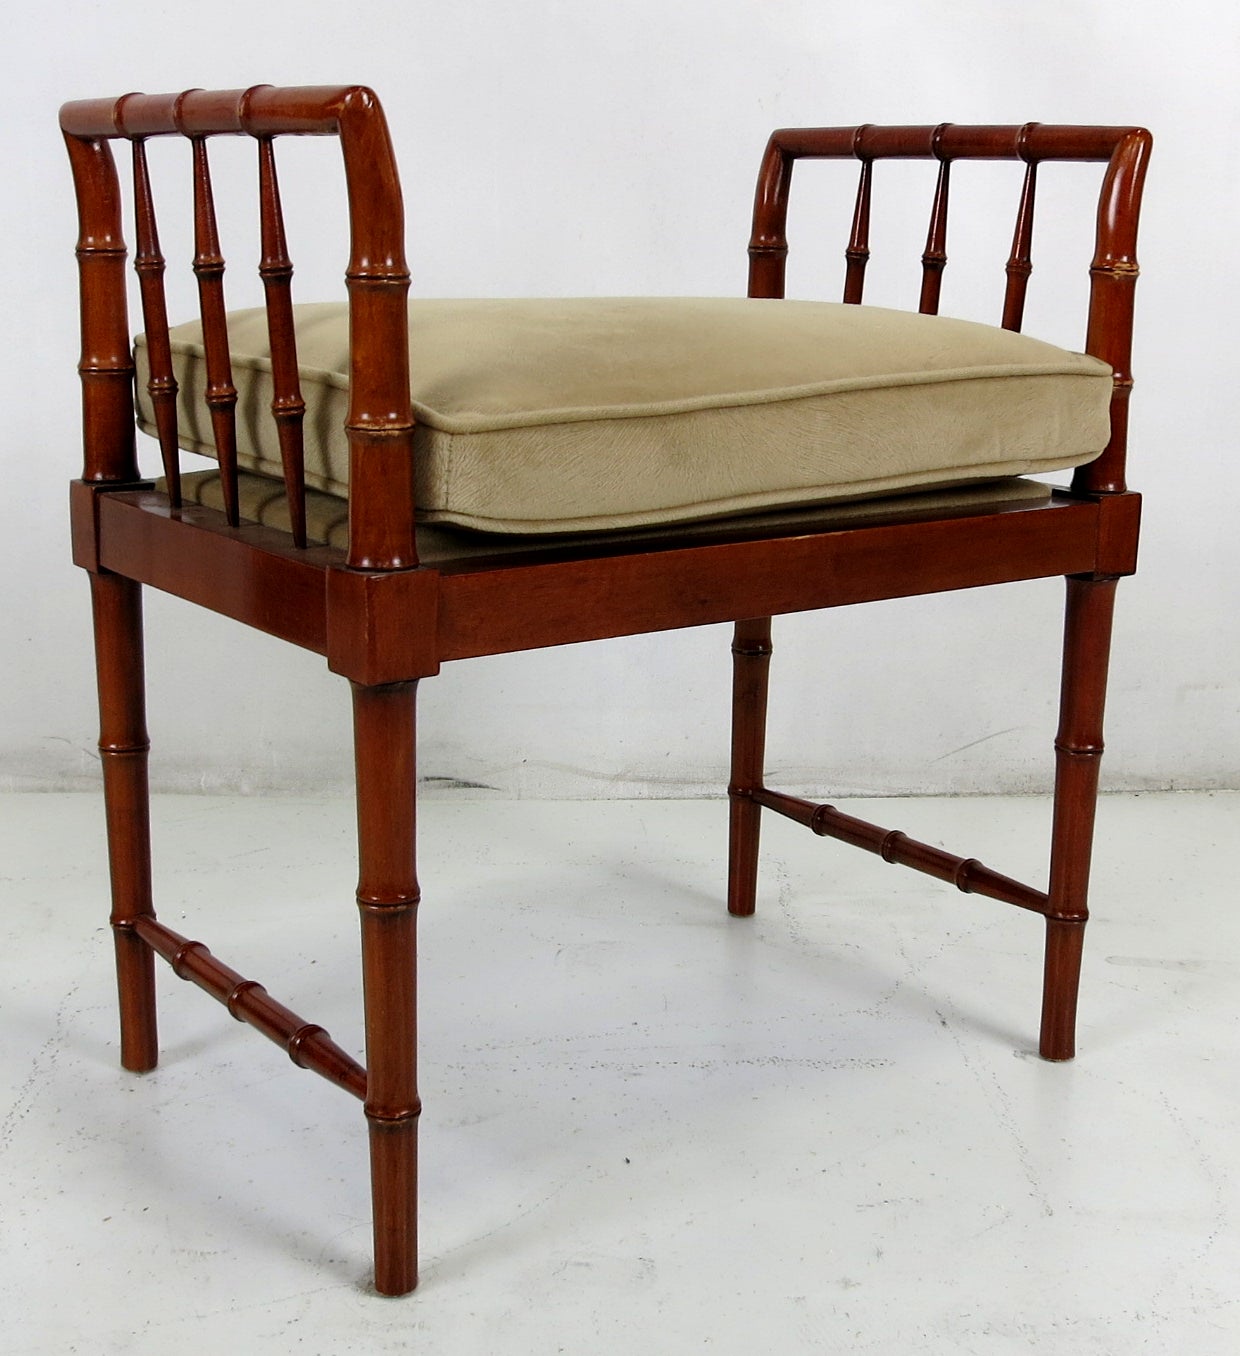 Classic vanity bench or stool by Baker Furniture, freshly upholstered in 